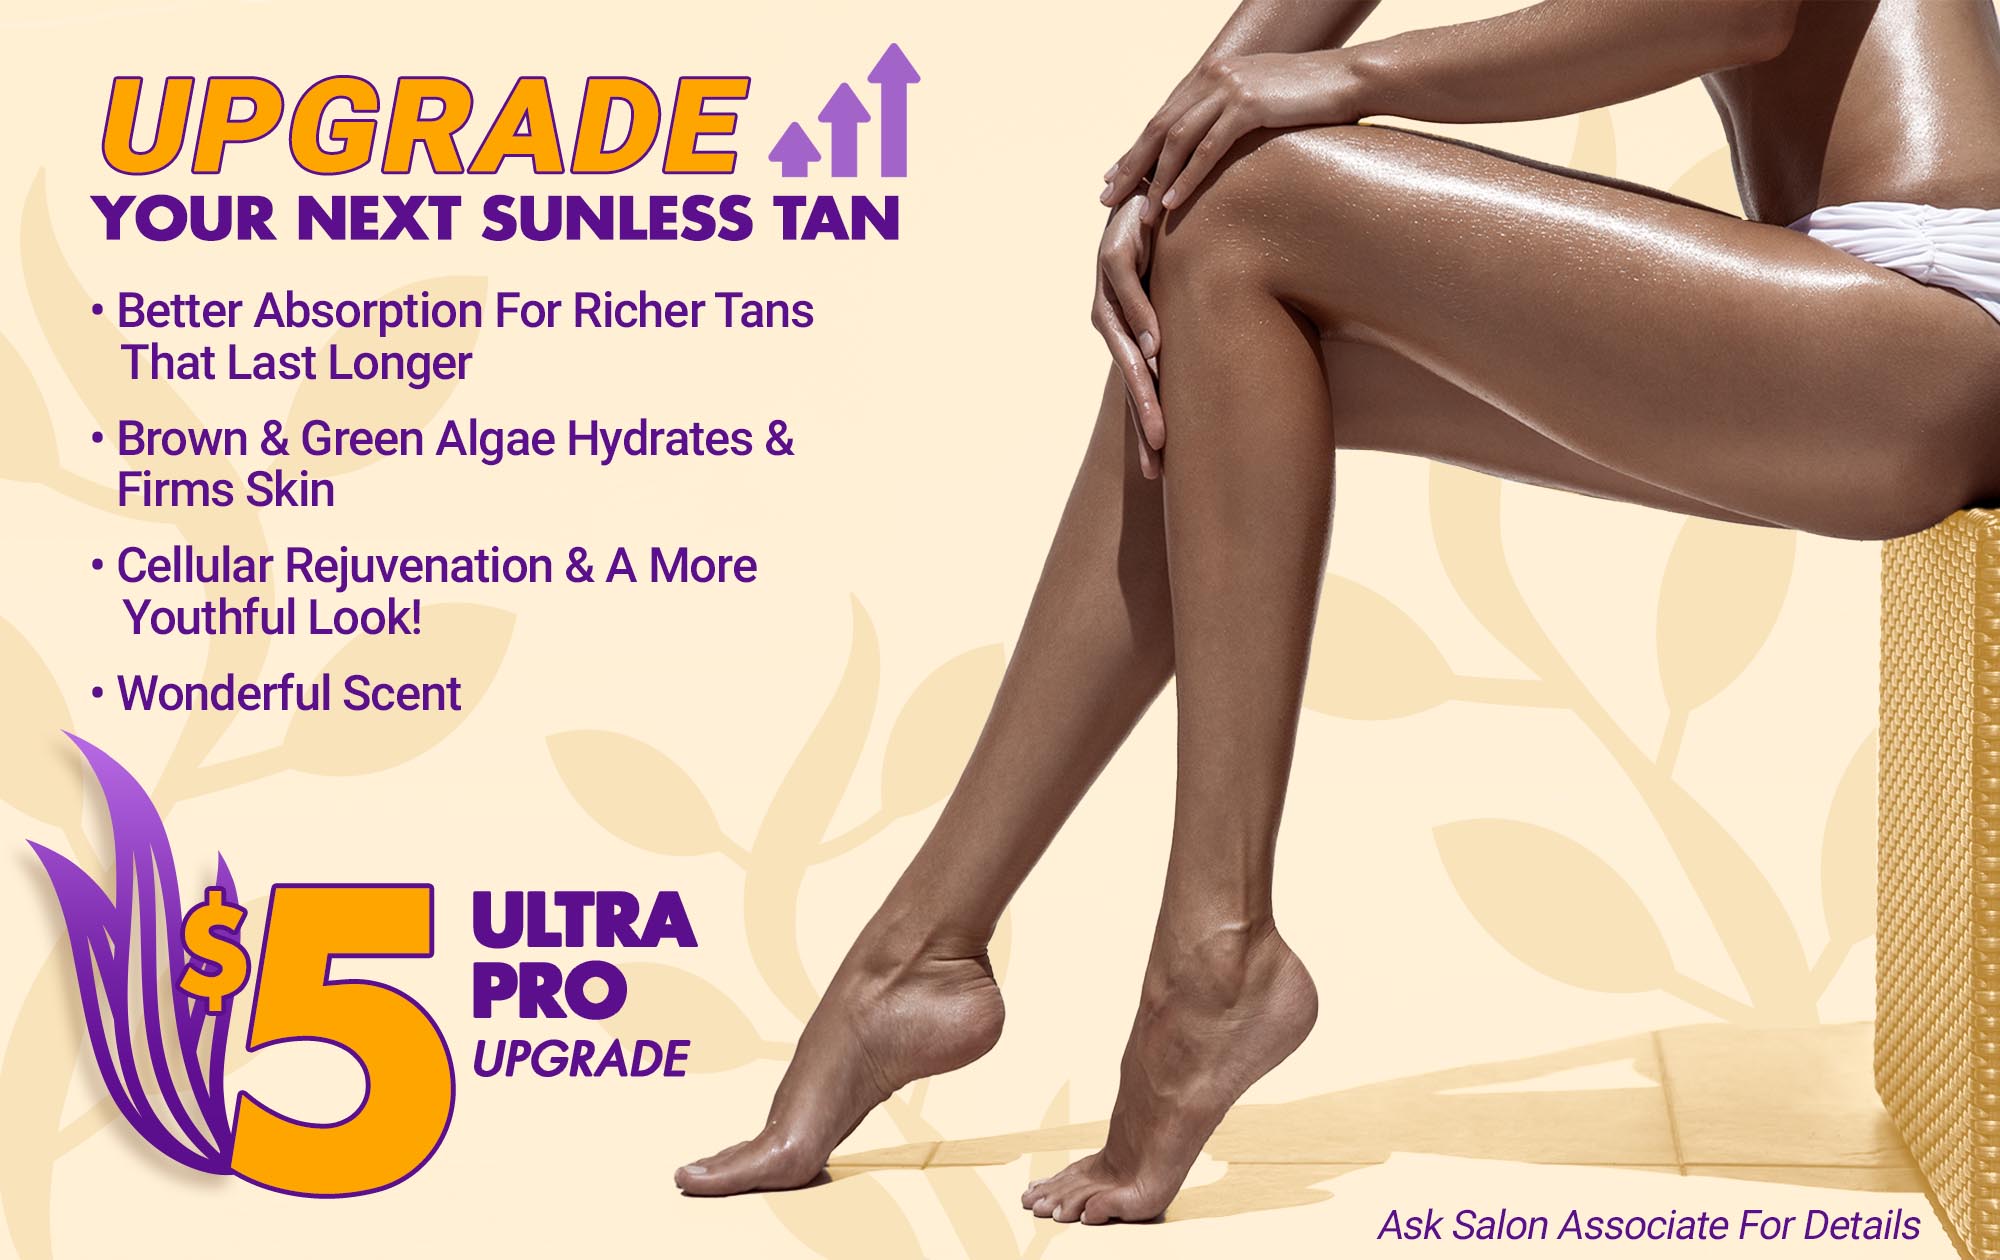 Upgrade Your Next Sunless Tan To Our Ultra Pro Upgrade For Only $5